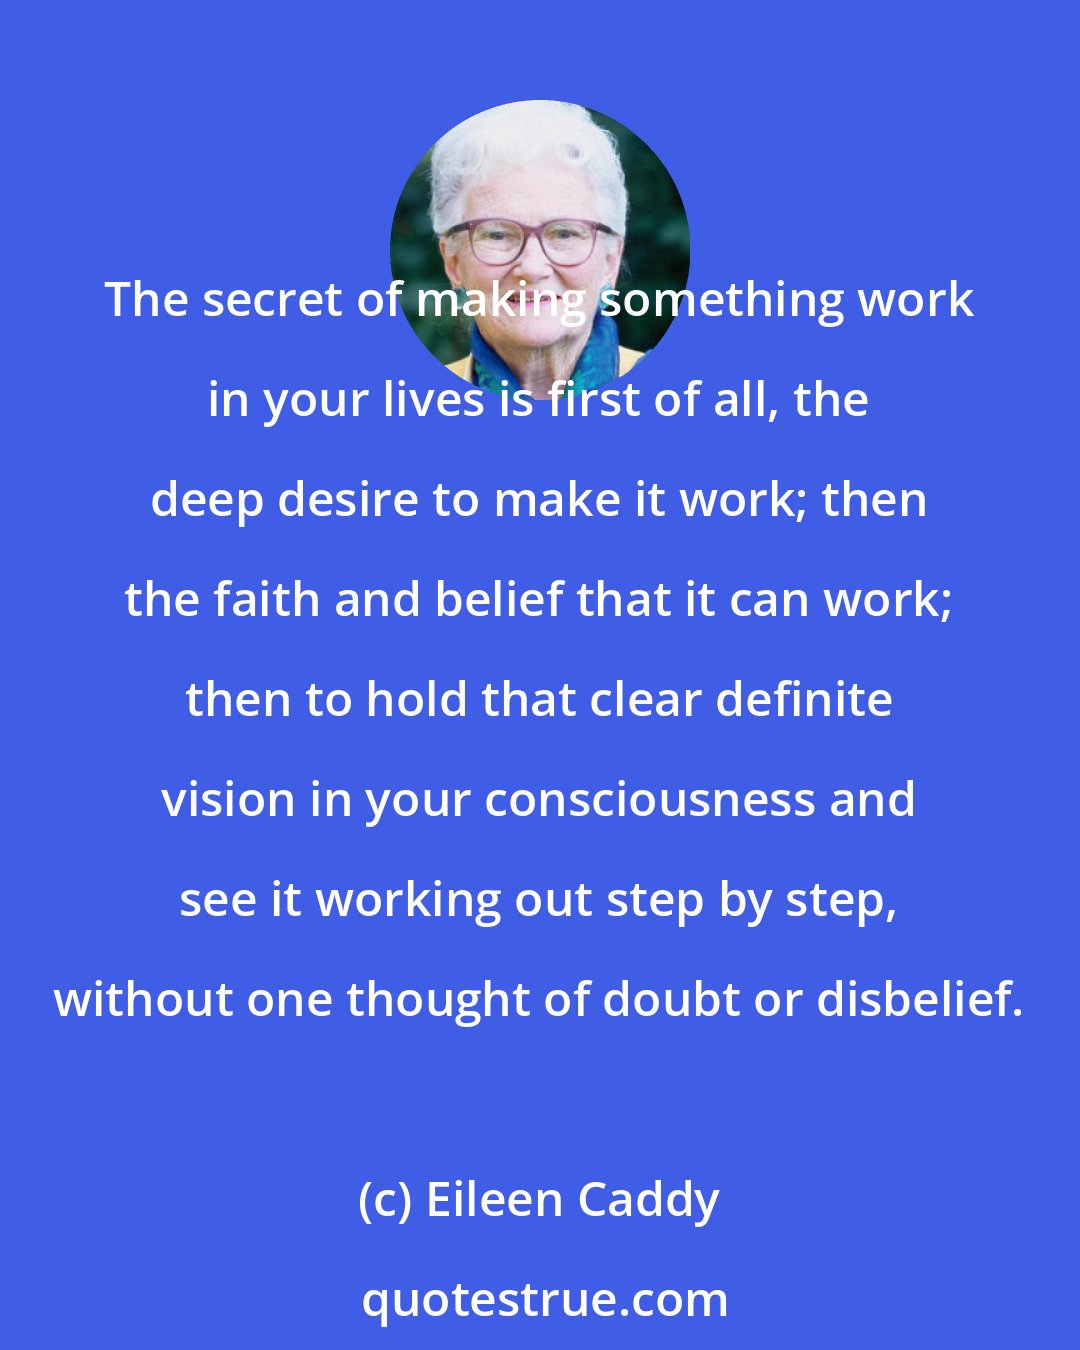 Eileen Caddy: The secret of making something work in your lives is first of all, the deep desire to make it work; then the faith and belief that it can work; then to hold that clear definite vision in your consciousness and see it working out step by step, without one thought of doubt or disbelief.